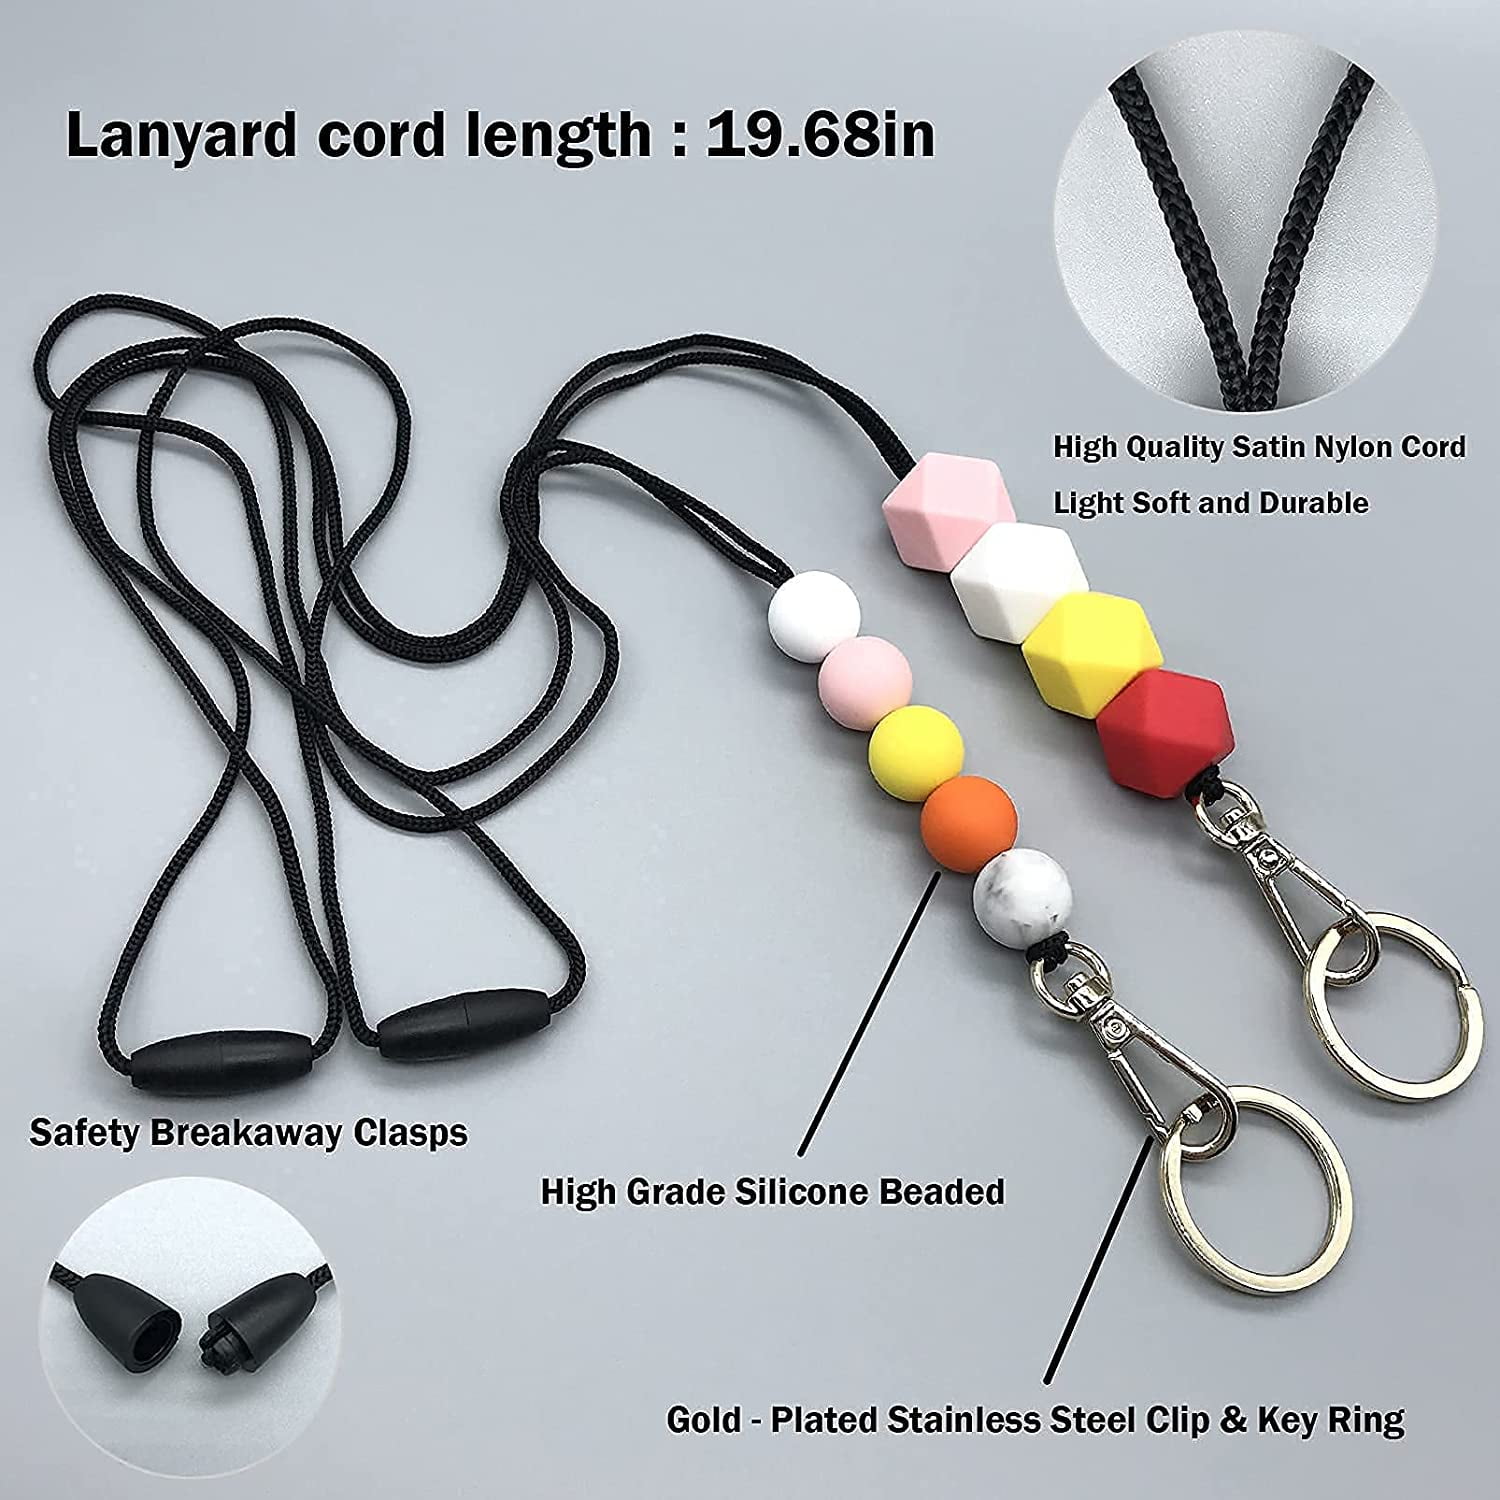 2PCS Badge Lanyards for Women Cute Lanyard Necklace for Teachers Nurse Employees Students Key Chain Holder with Key Ring for Keys / ID Badges Fashion Silicone Beaded Lanyard 